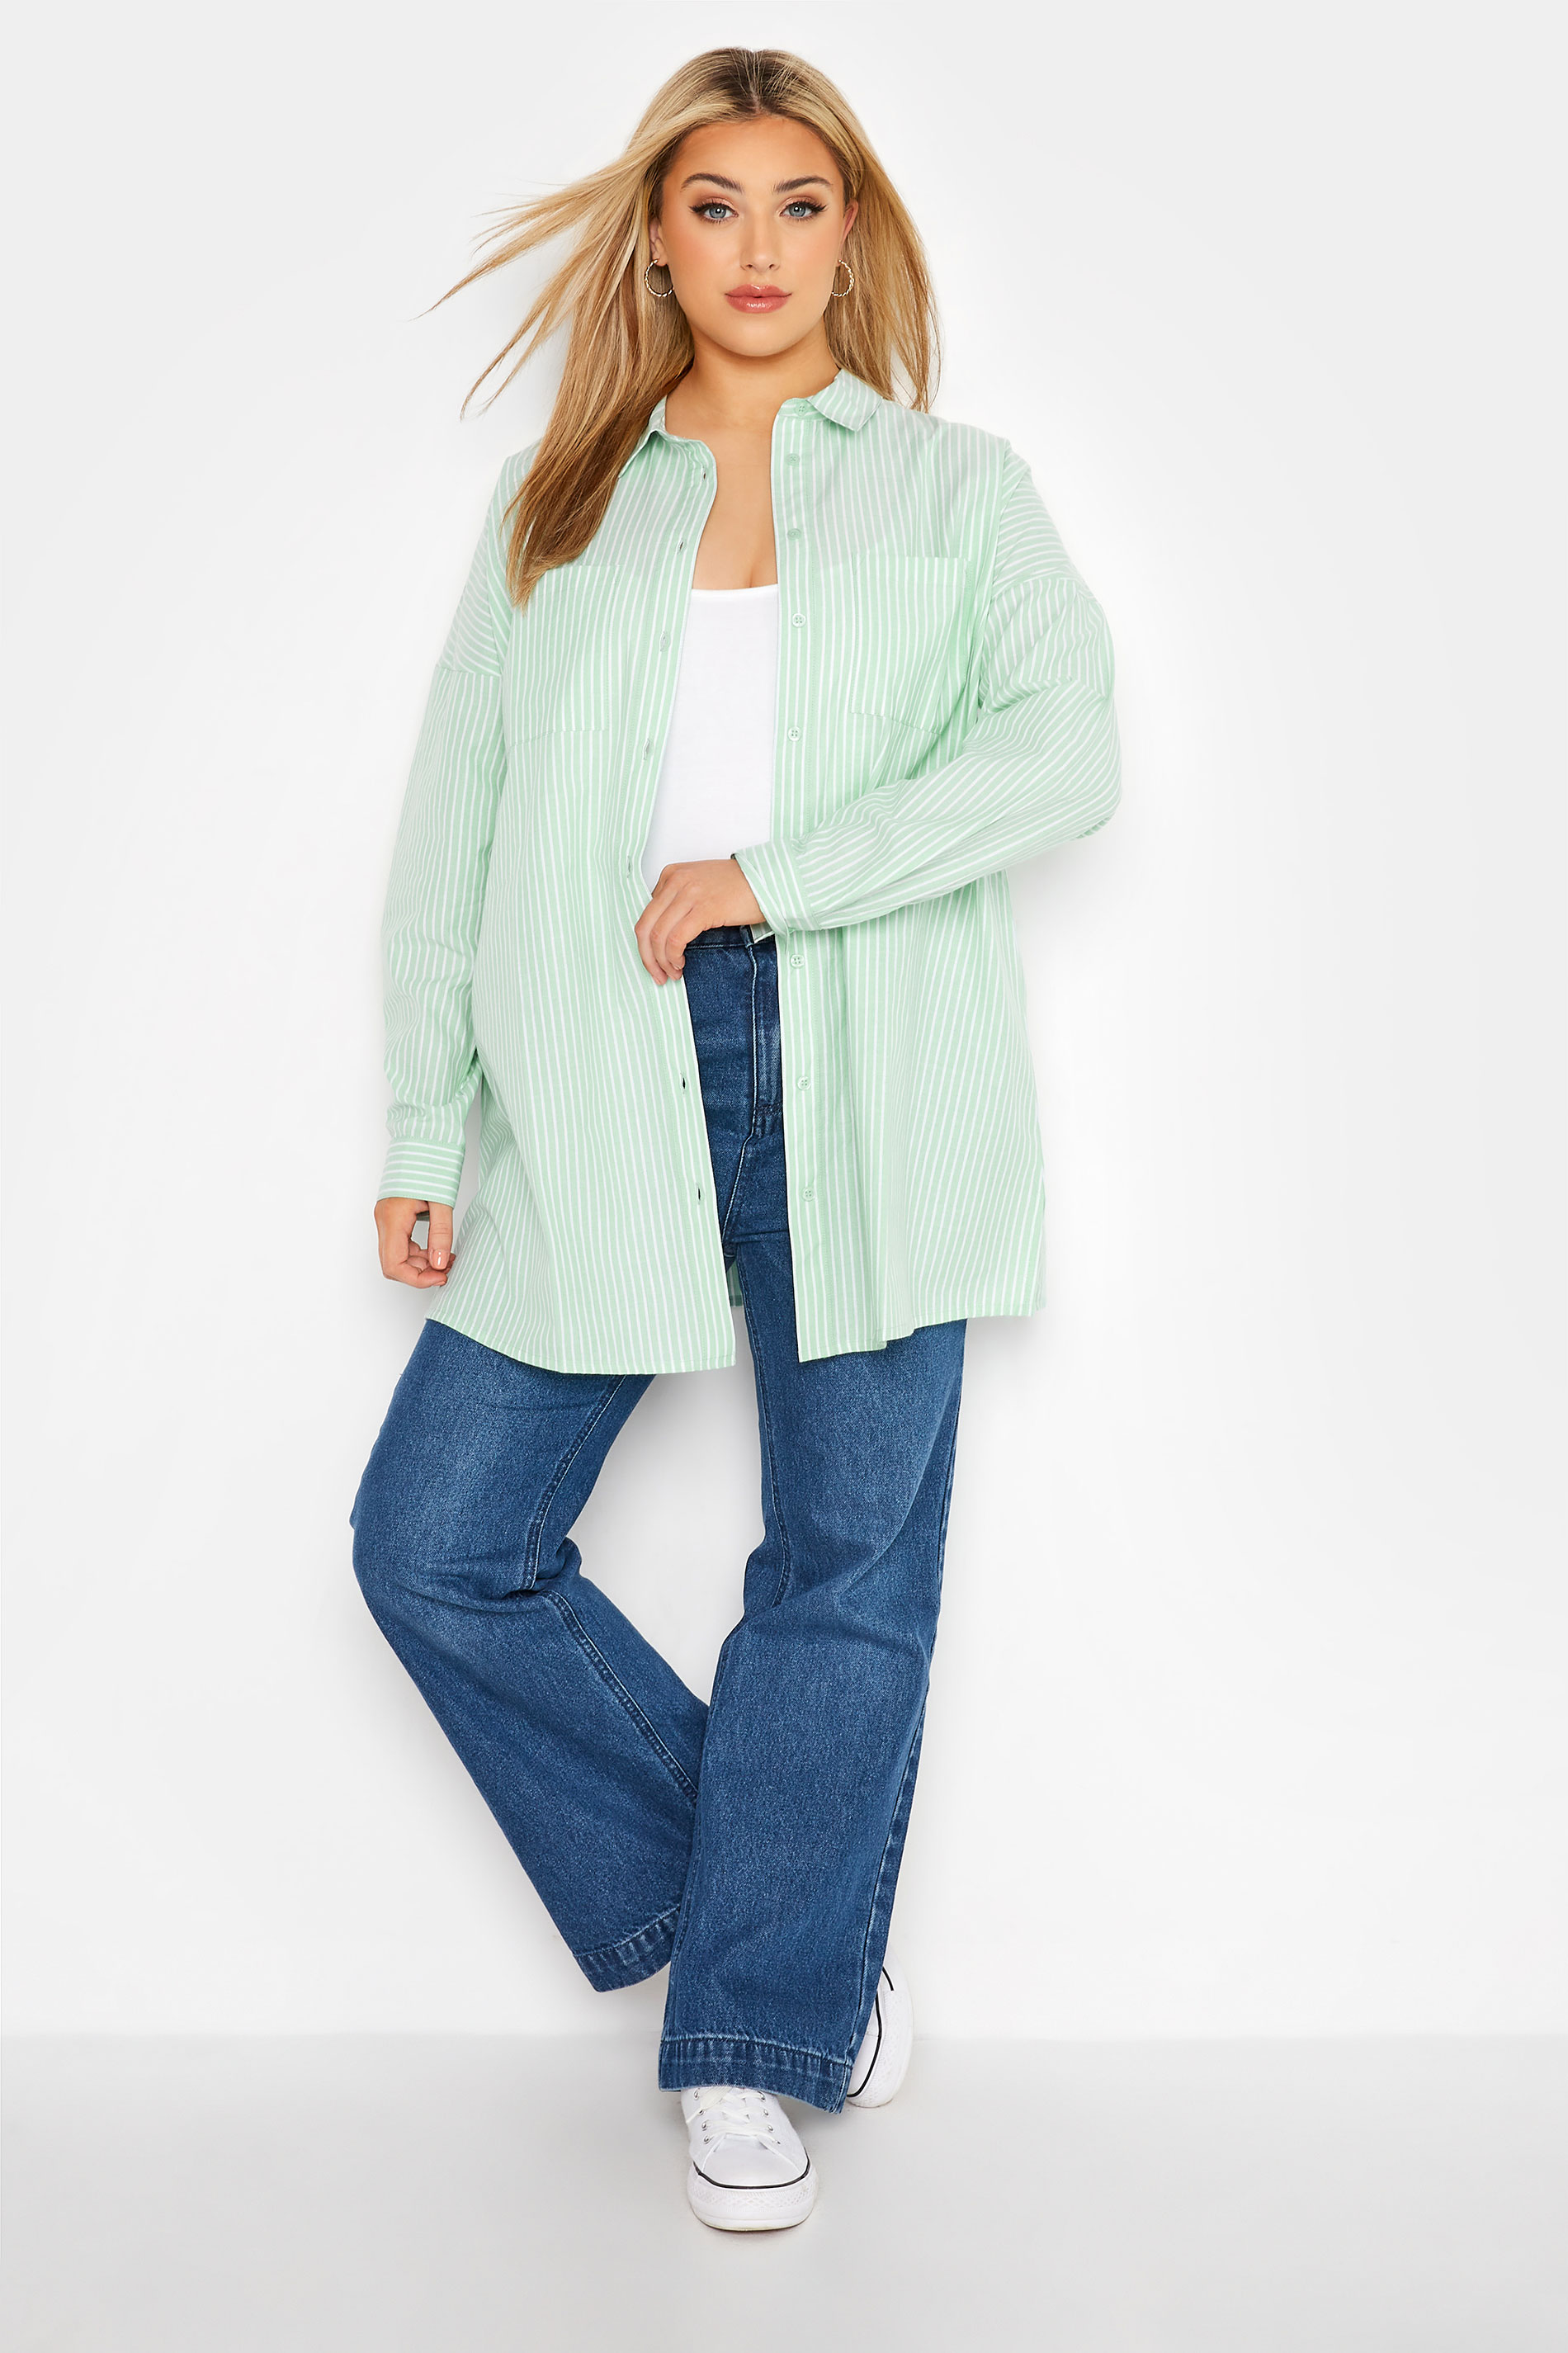 Grande taille  Blouses & Chemisiers Grande taille  Chemisiers | YOURS FOR GOOD - Chemisier Vert Pastel Oversize à Rayures - NJ02748